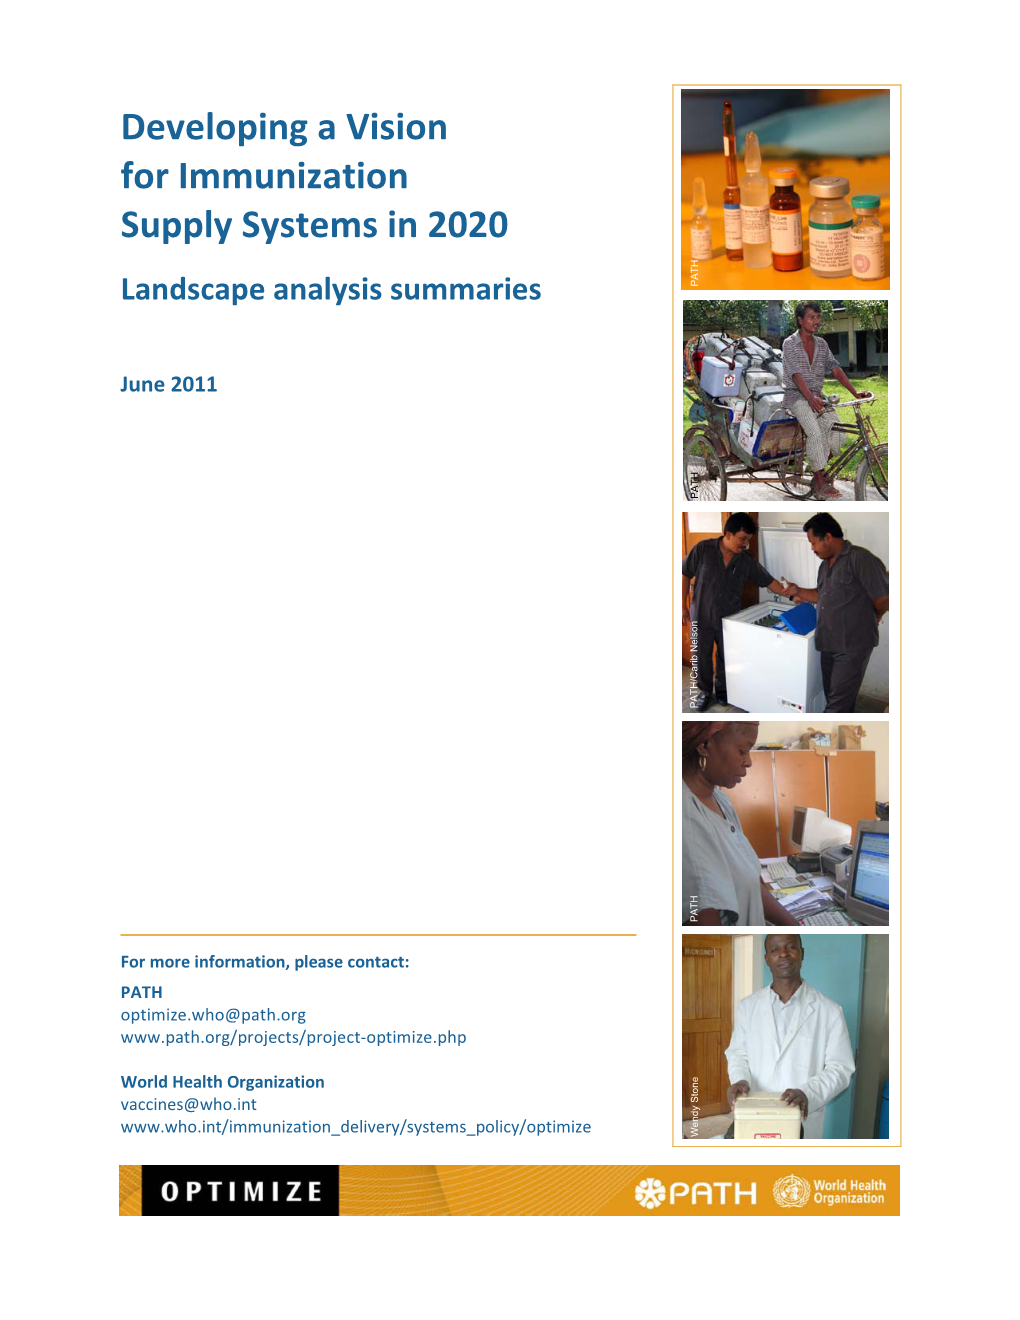 Developing a Vision for Immunization Supply Systems in 2020